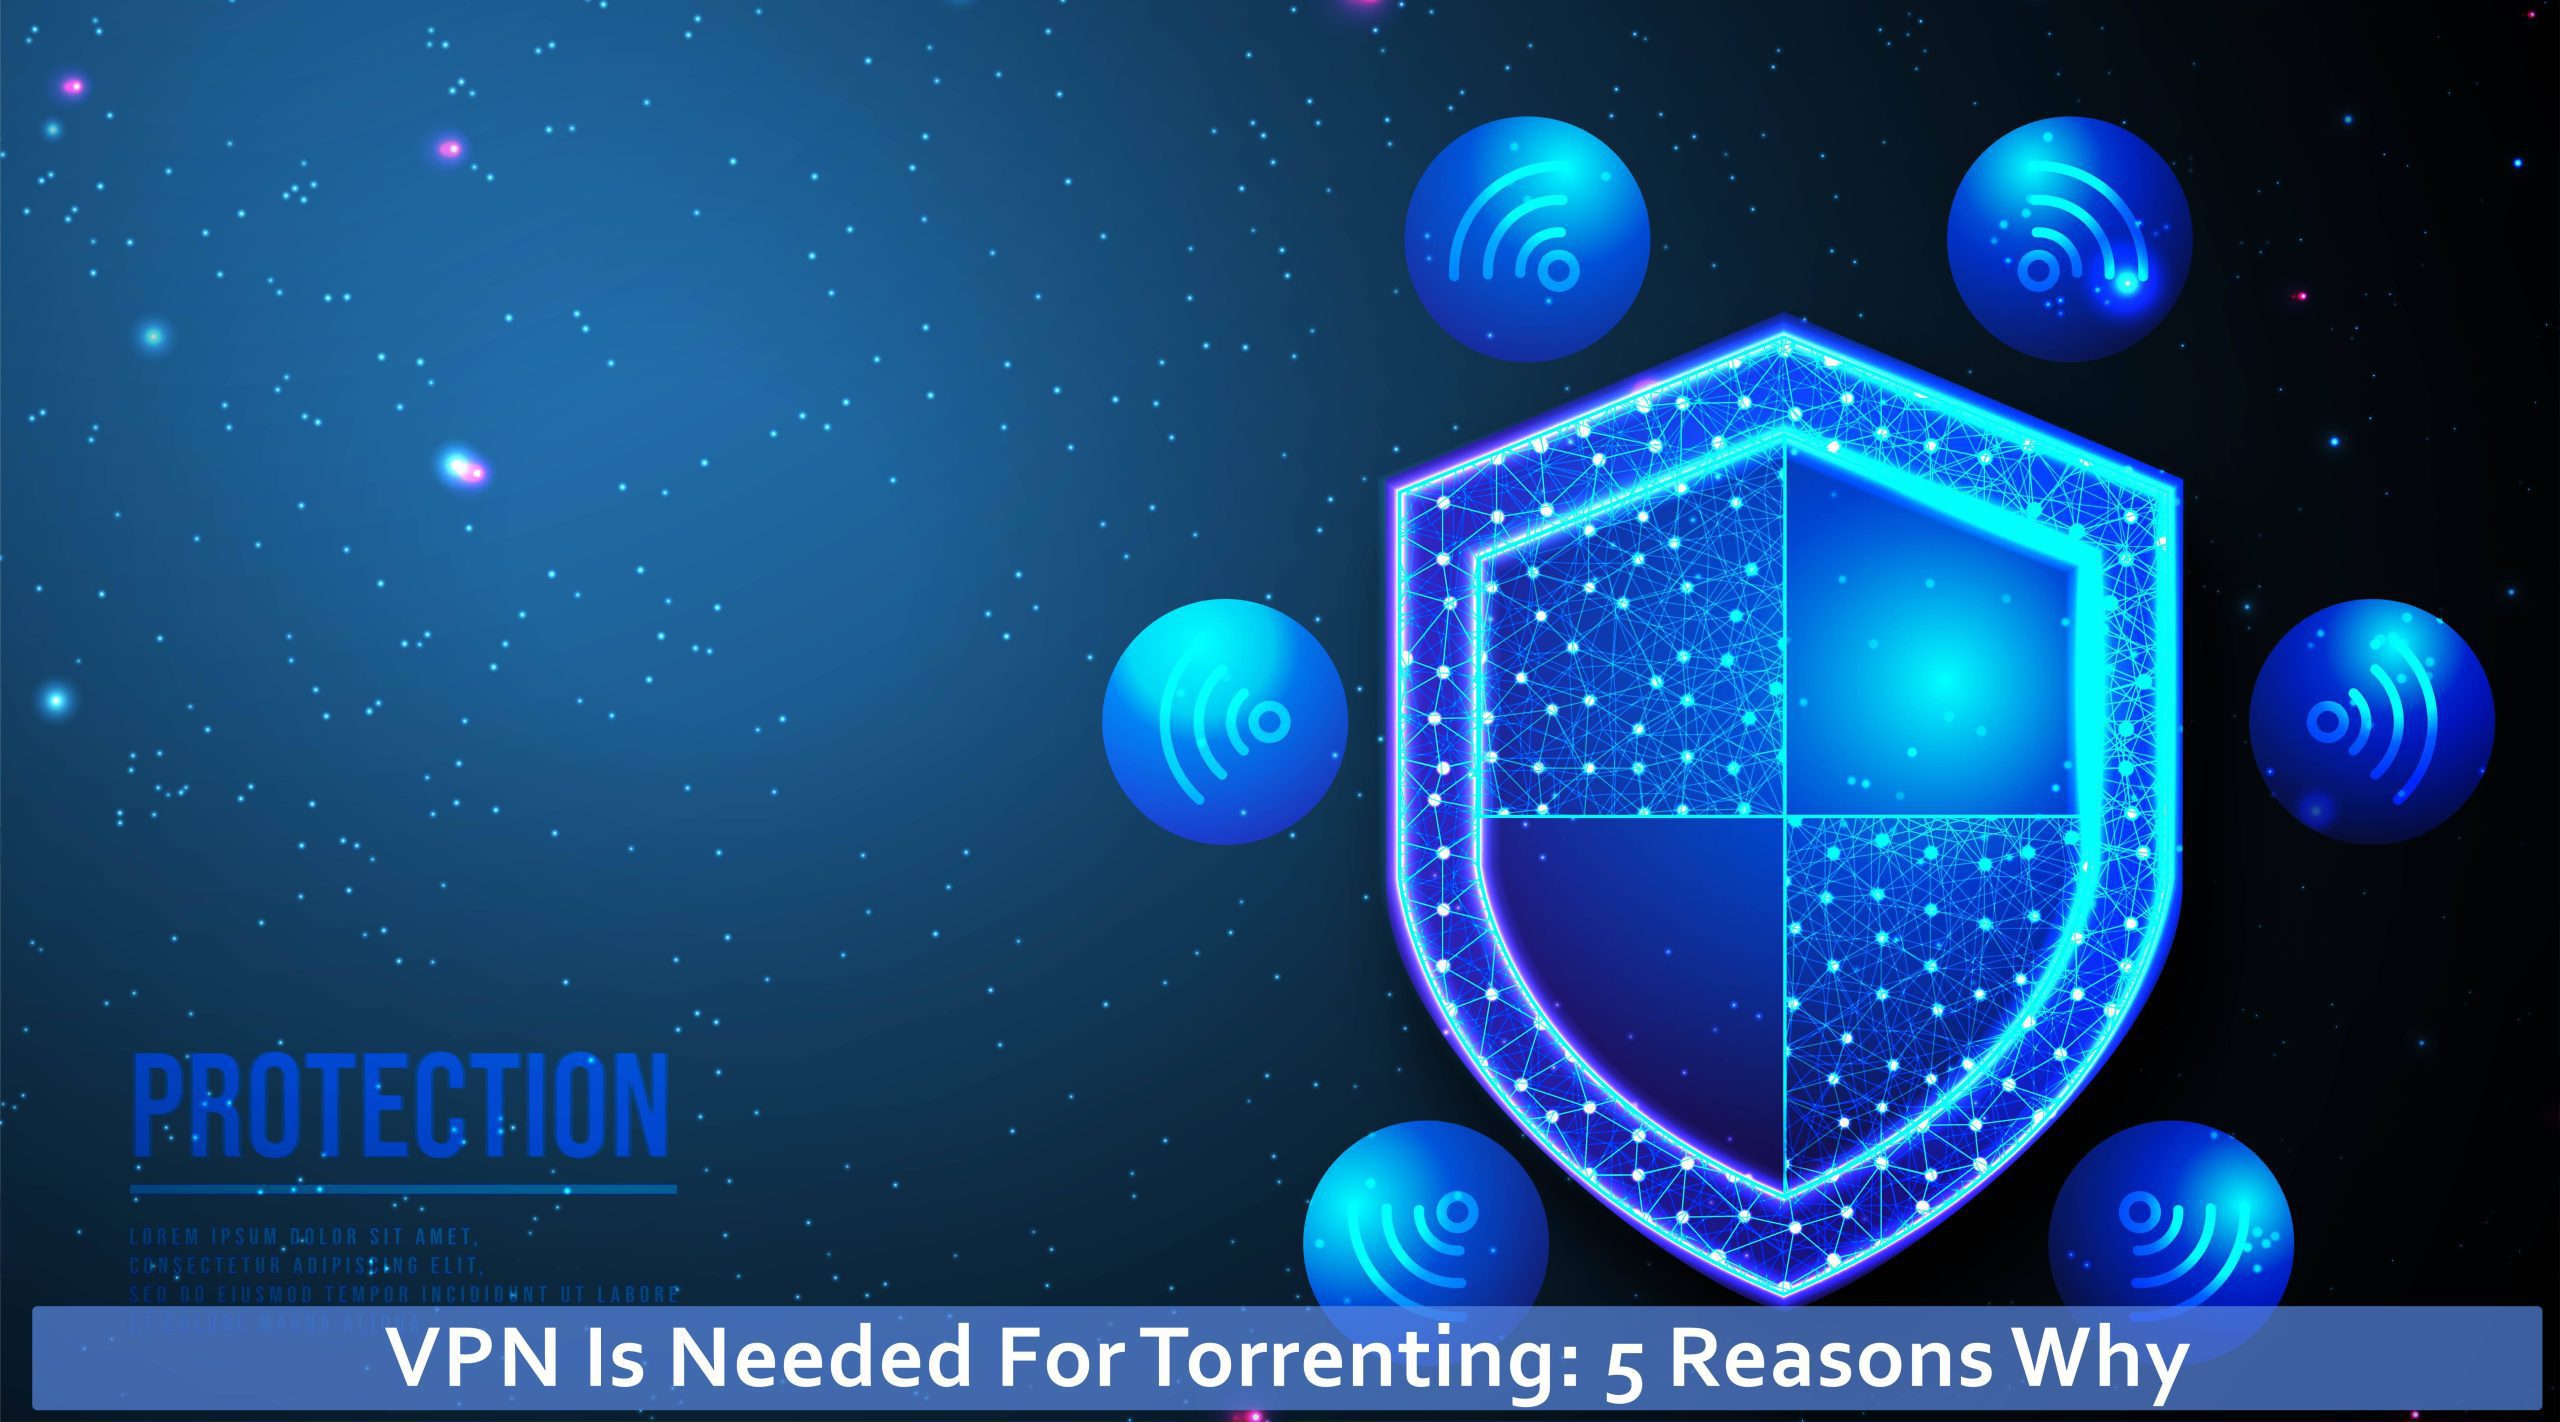 VPN Is Needed For Torrenting: 5 Reasons Why